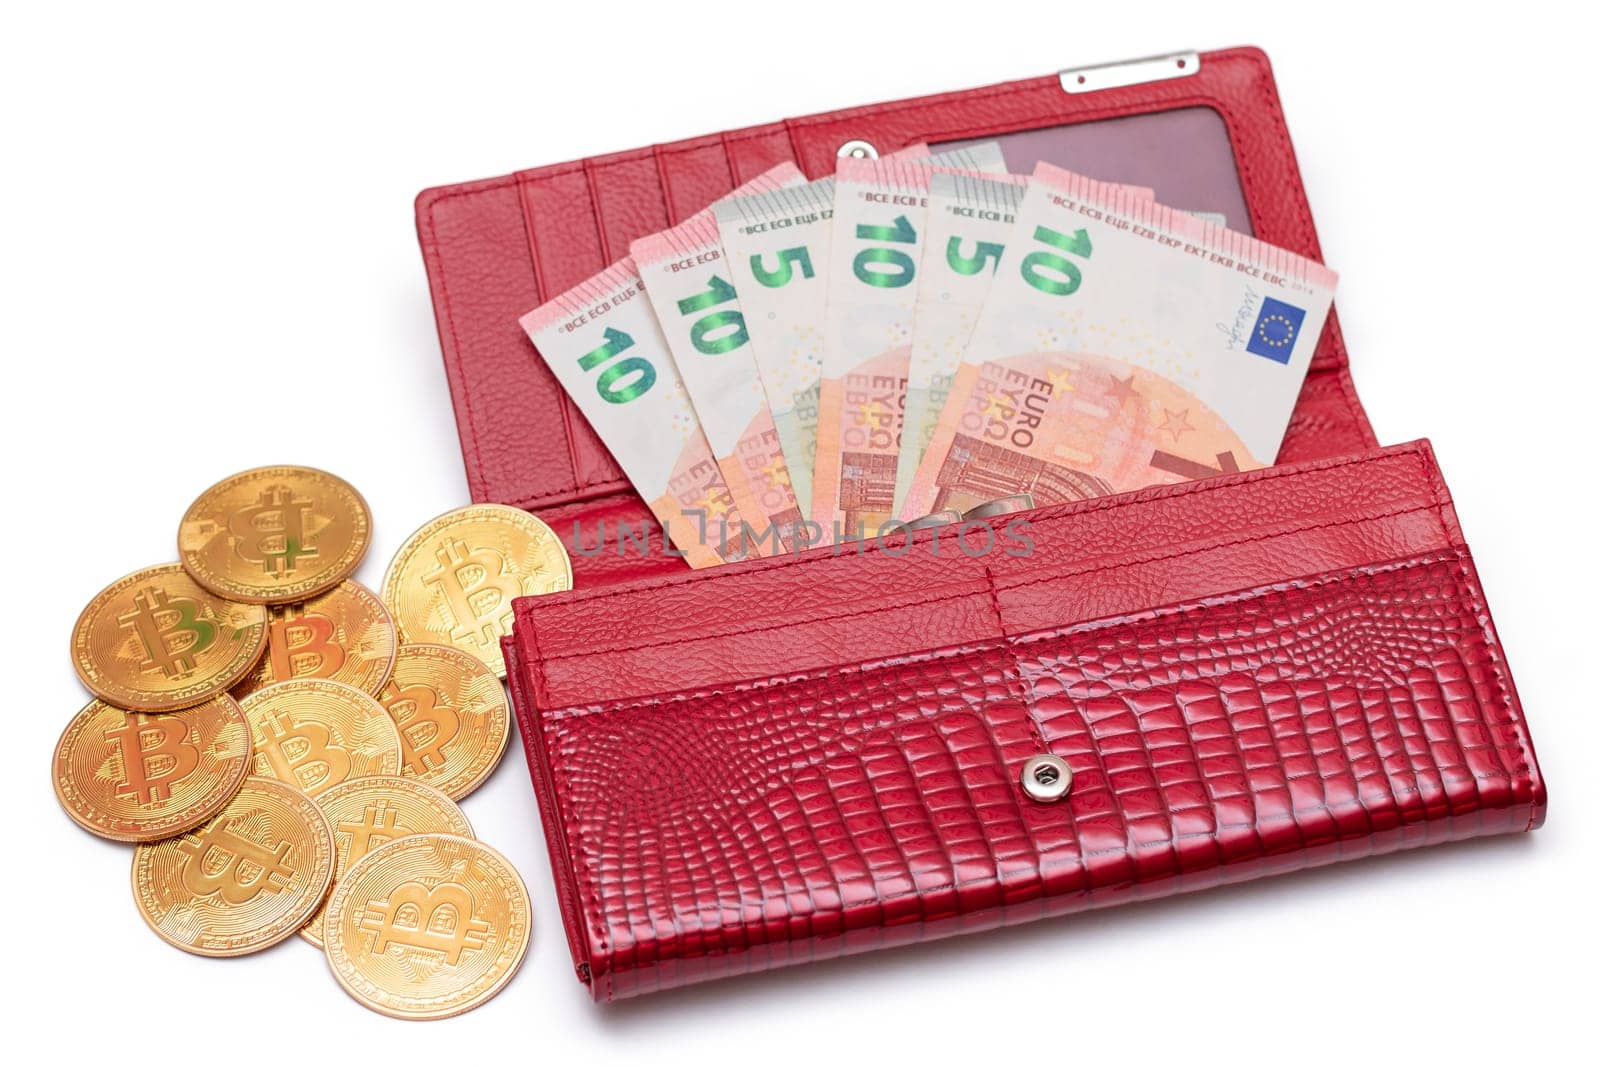 Opened Red Women Purse with 10 Euro Banknotes Inside and Bitcoin Coins - Isolated on White Background. A Wallet Full of Money Symbolizing Wealth, Success, Shopping and Social Status - Isolation